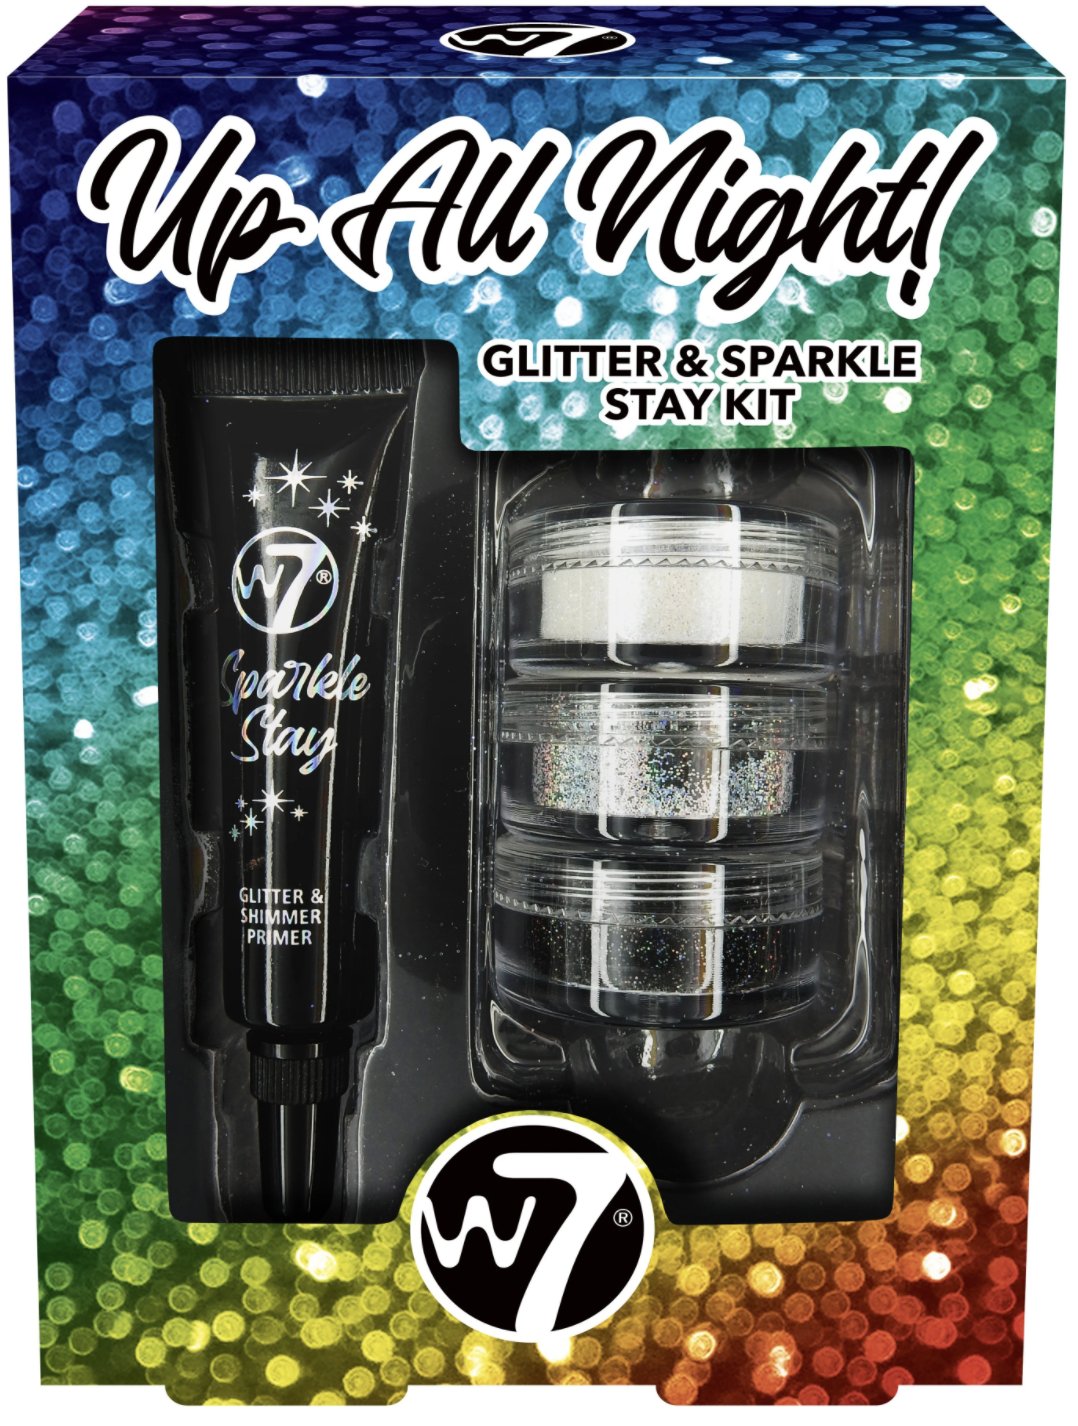 W7 Up All Night Glitter and Sparkle Stay